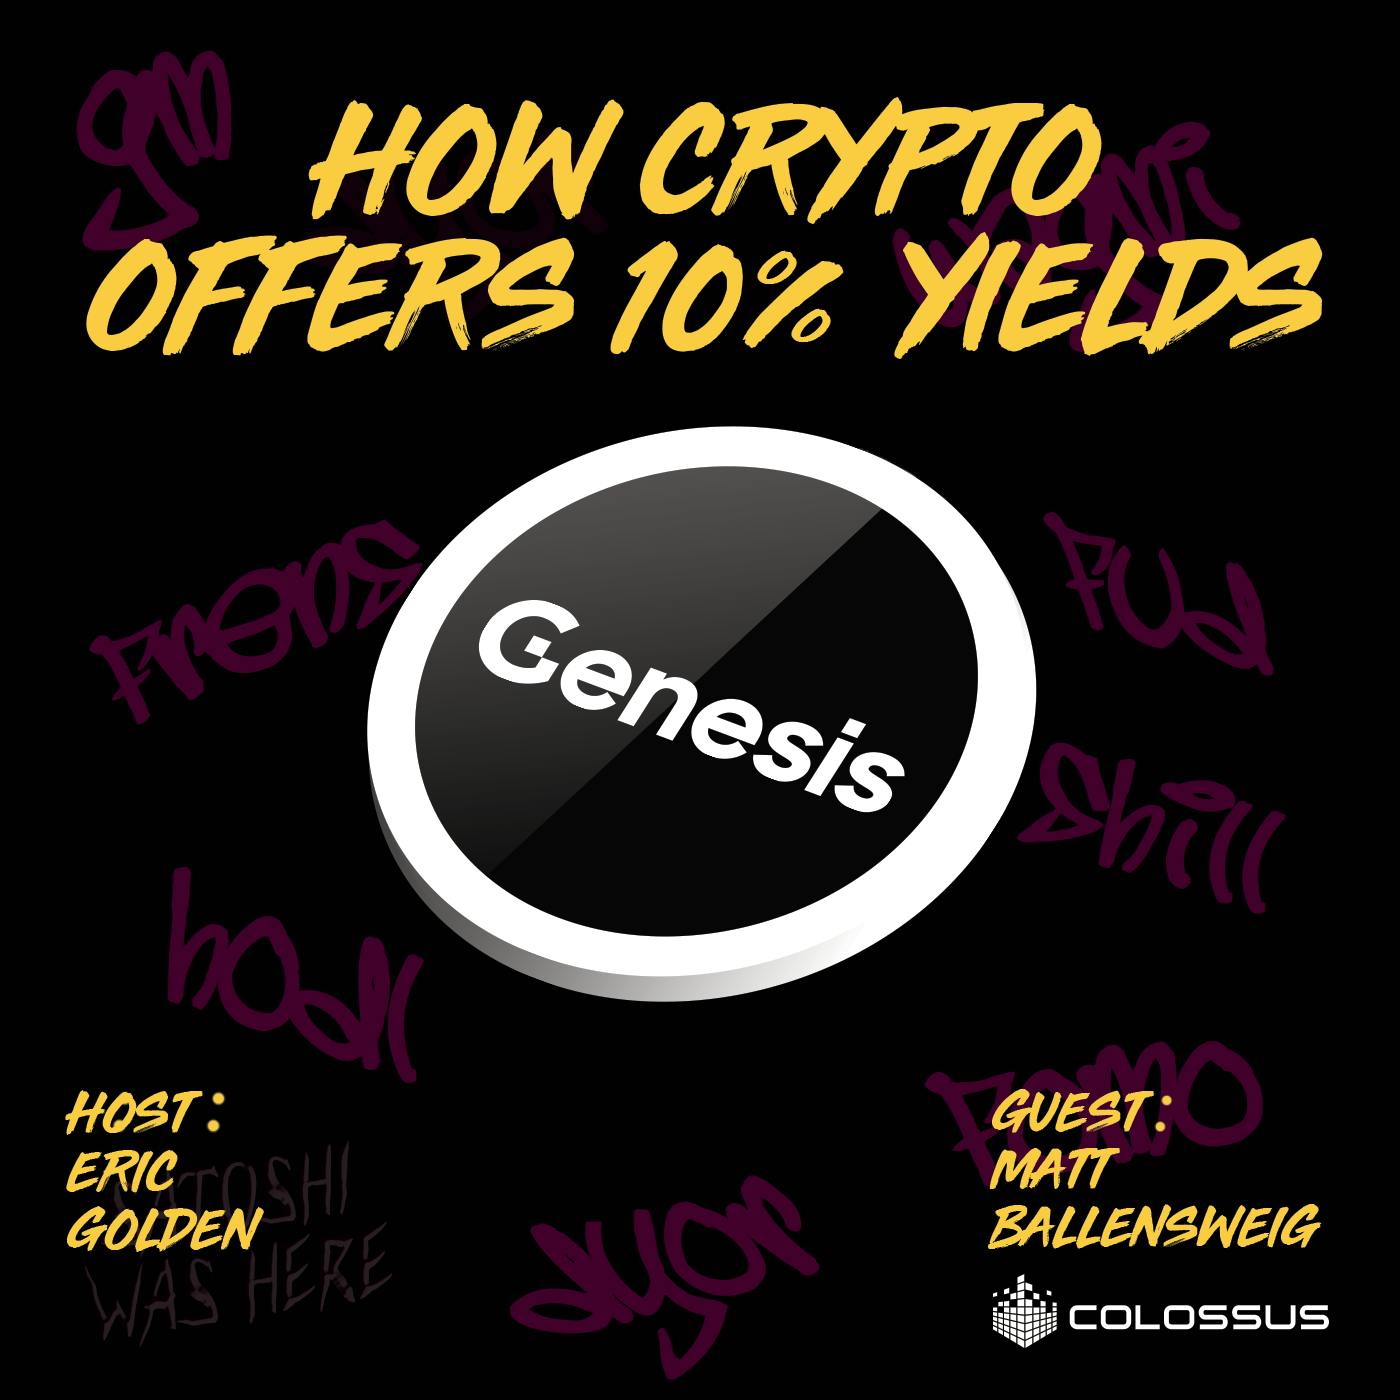 How Crypto Offers 10% Yields - [Web3 Breakdowns, EP. 15]